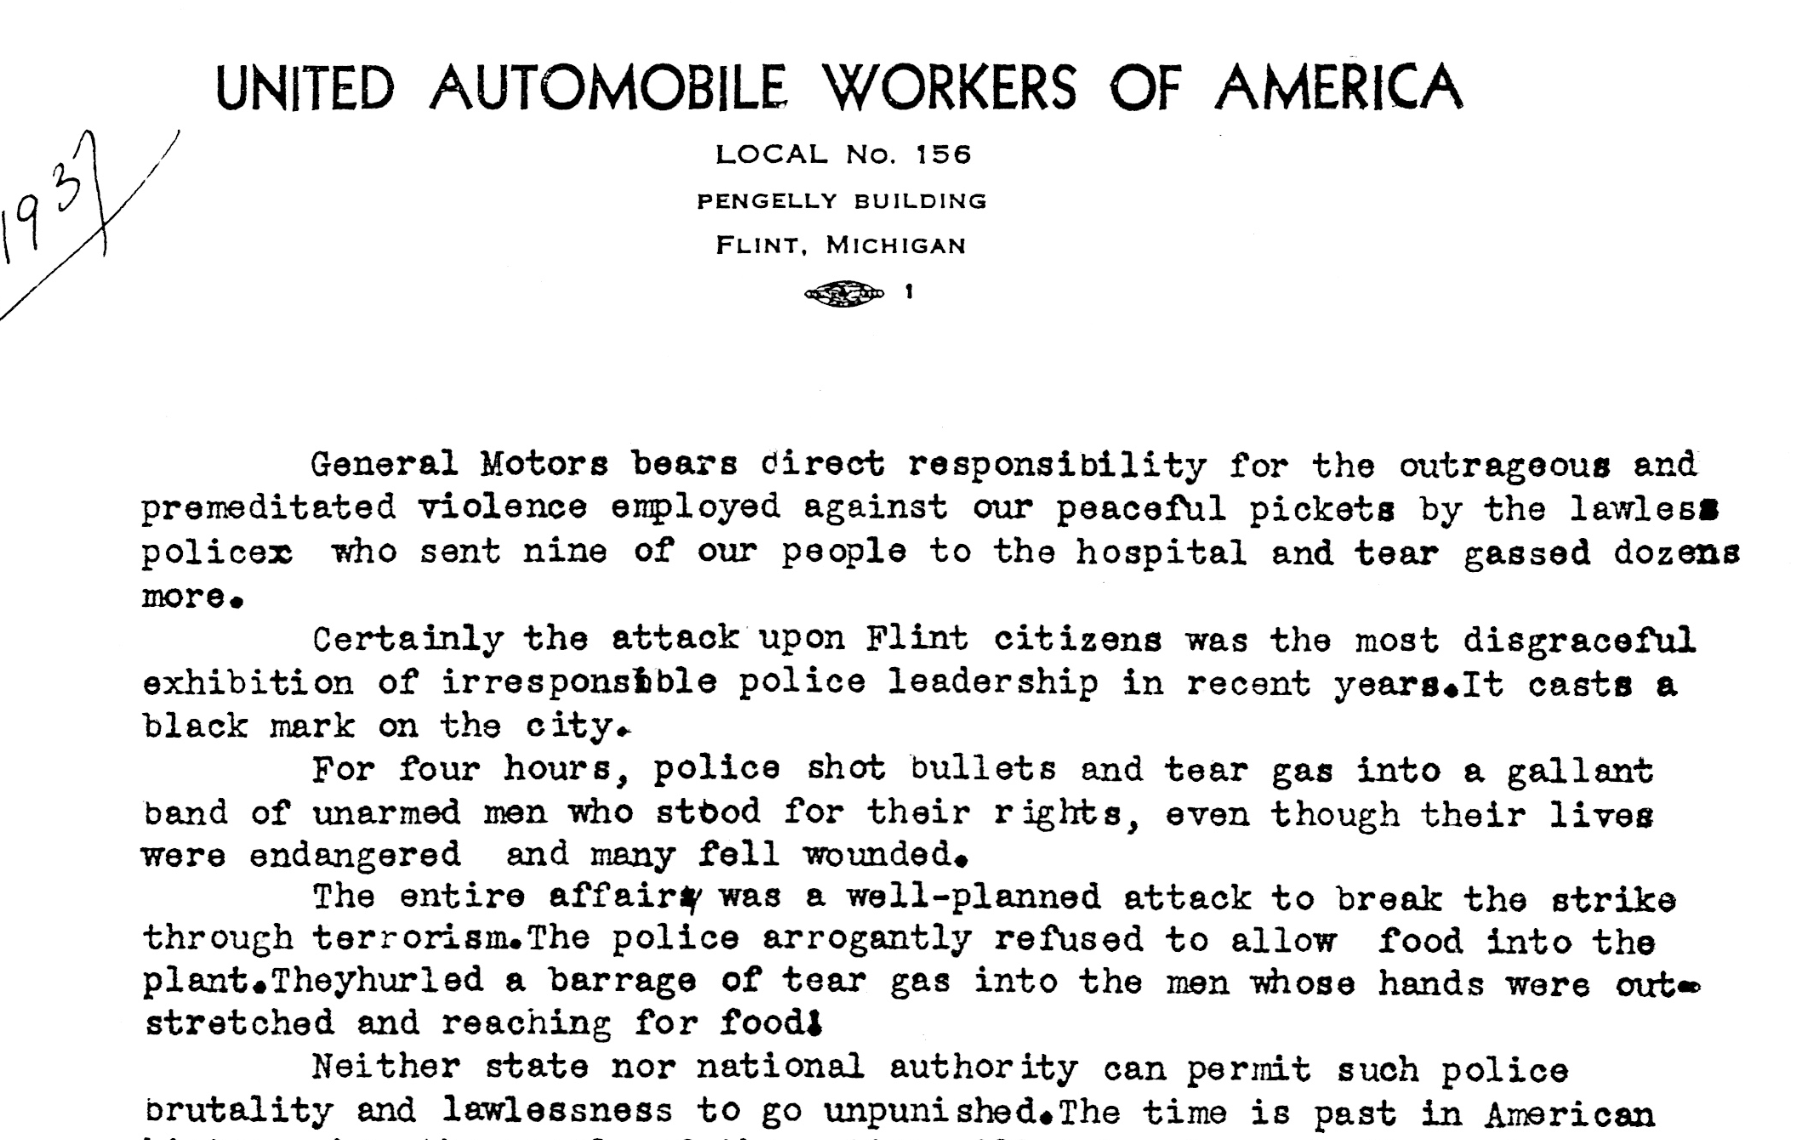 Clip from letter on United Automobile Workers of America letterhead